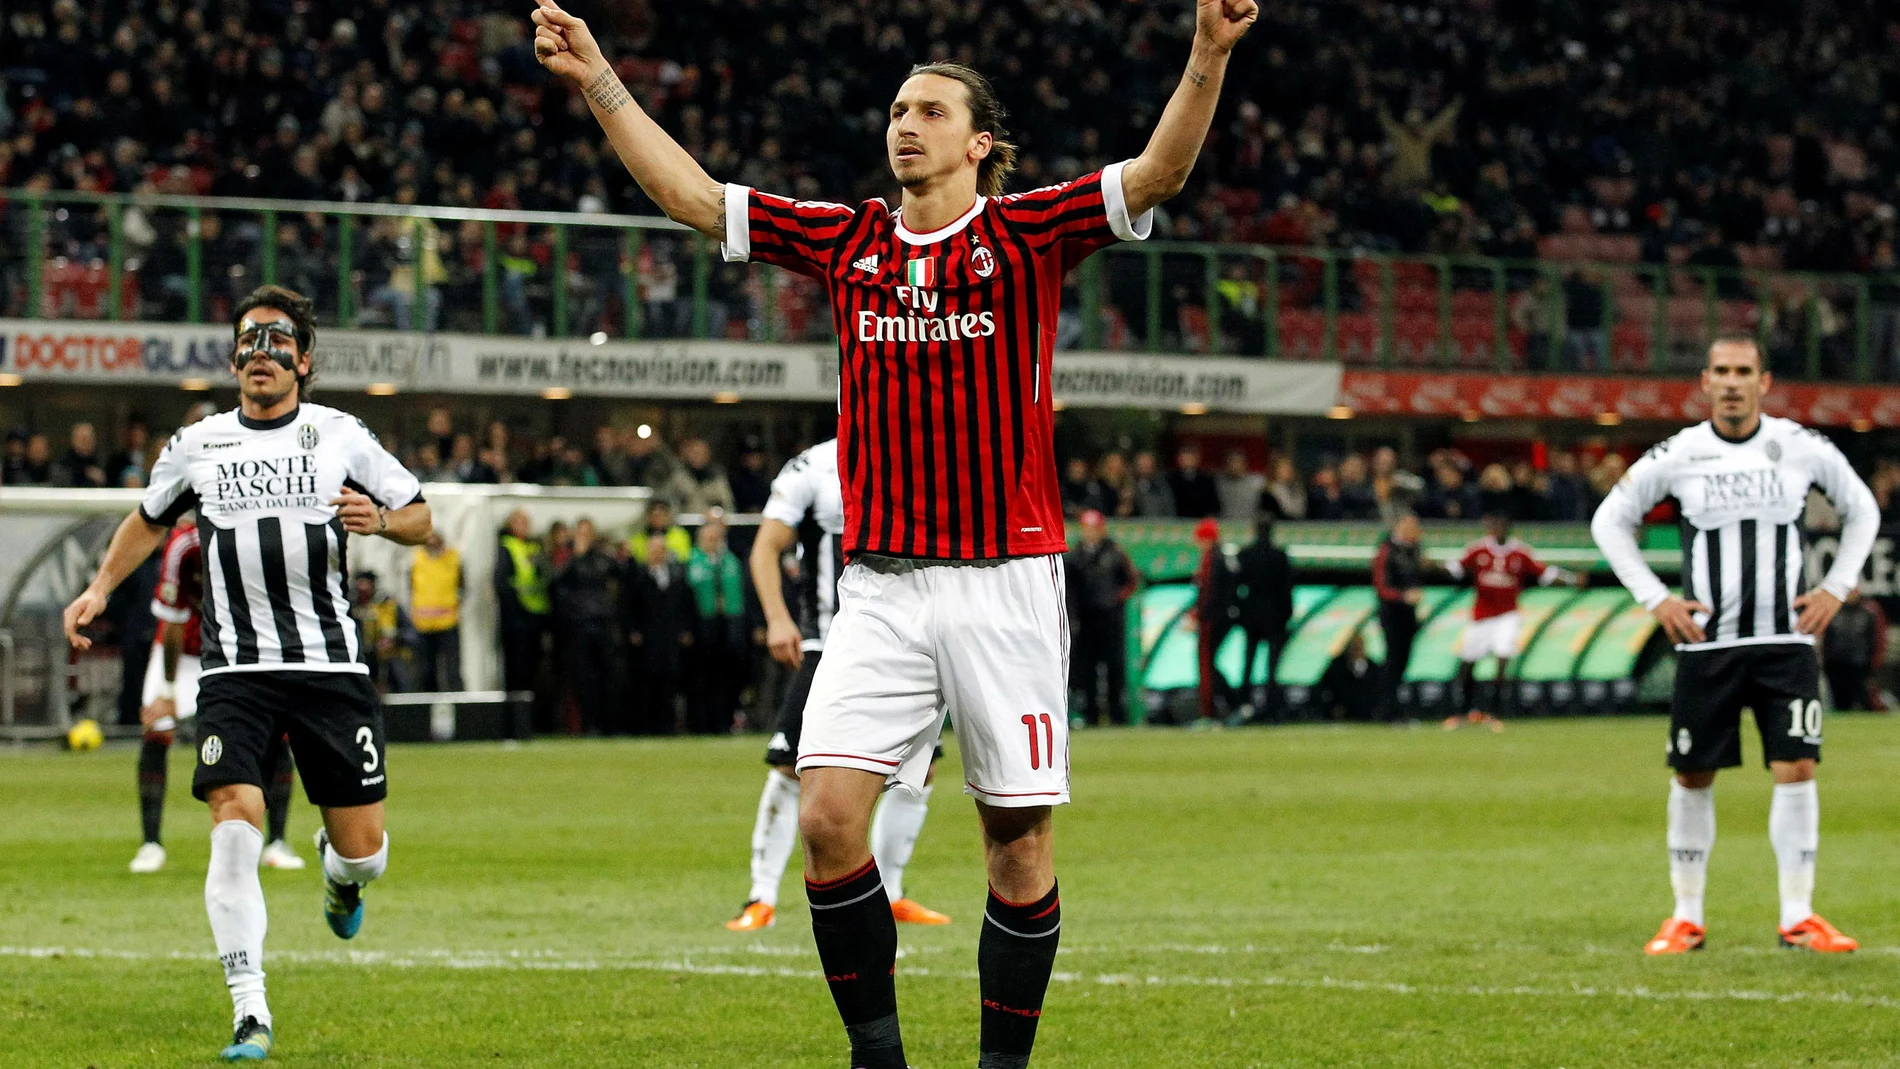 FILE PHOTO: AC Milan's Zlatan Ibrahimovic celebrates after scoring a goal against Siena during their Italian Serie A soccer match in Milan